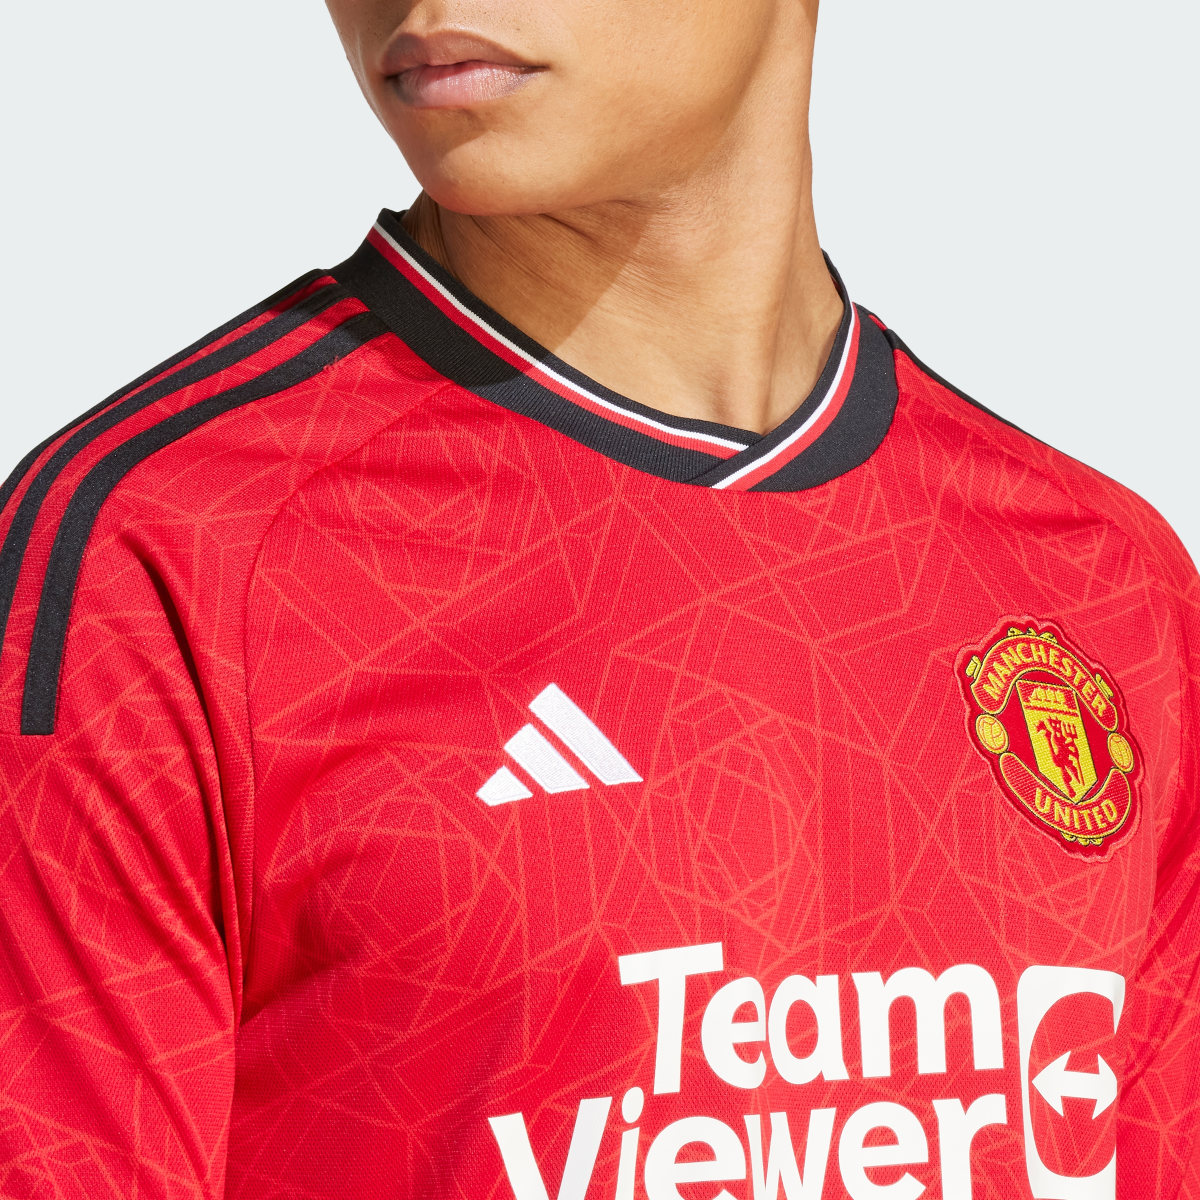 Adidas Maillot manches longues Domicile Manchester United 23/24. 8